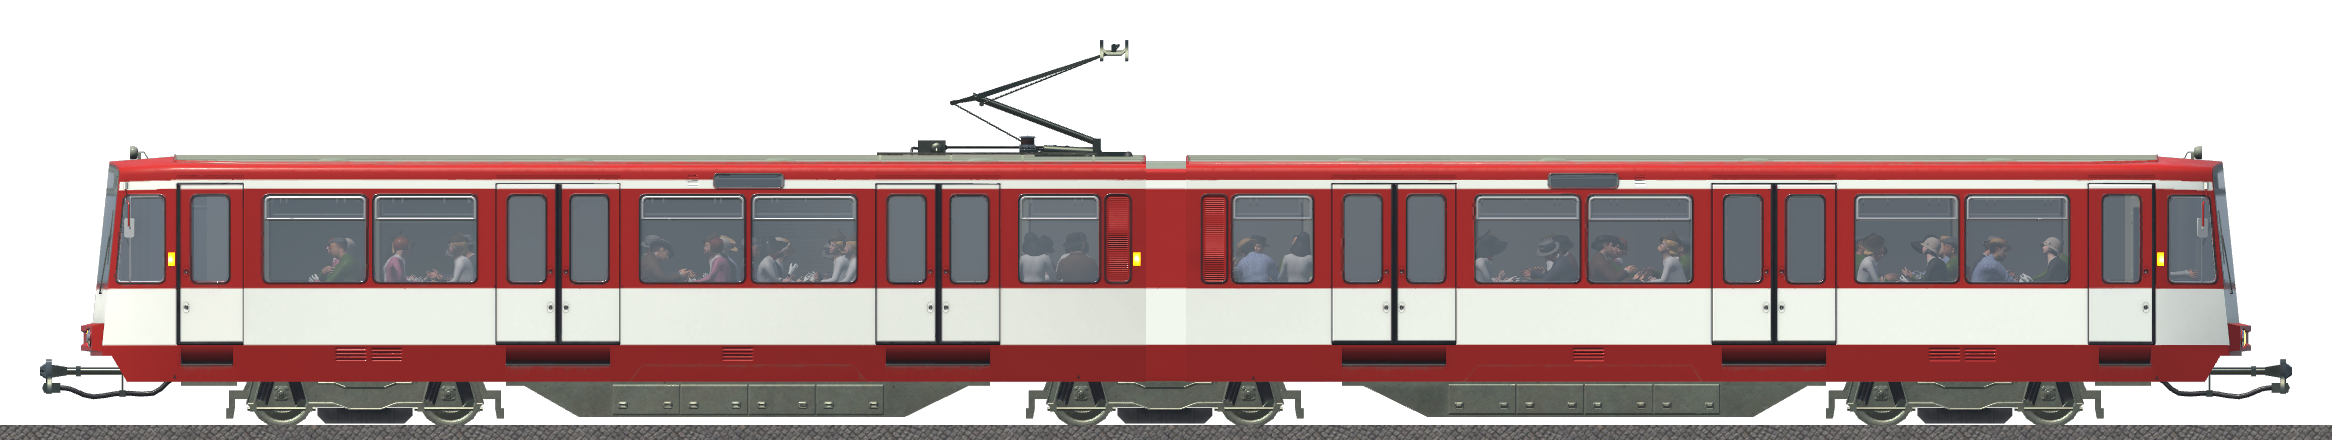 Tag-24-4-B-Wagen.png